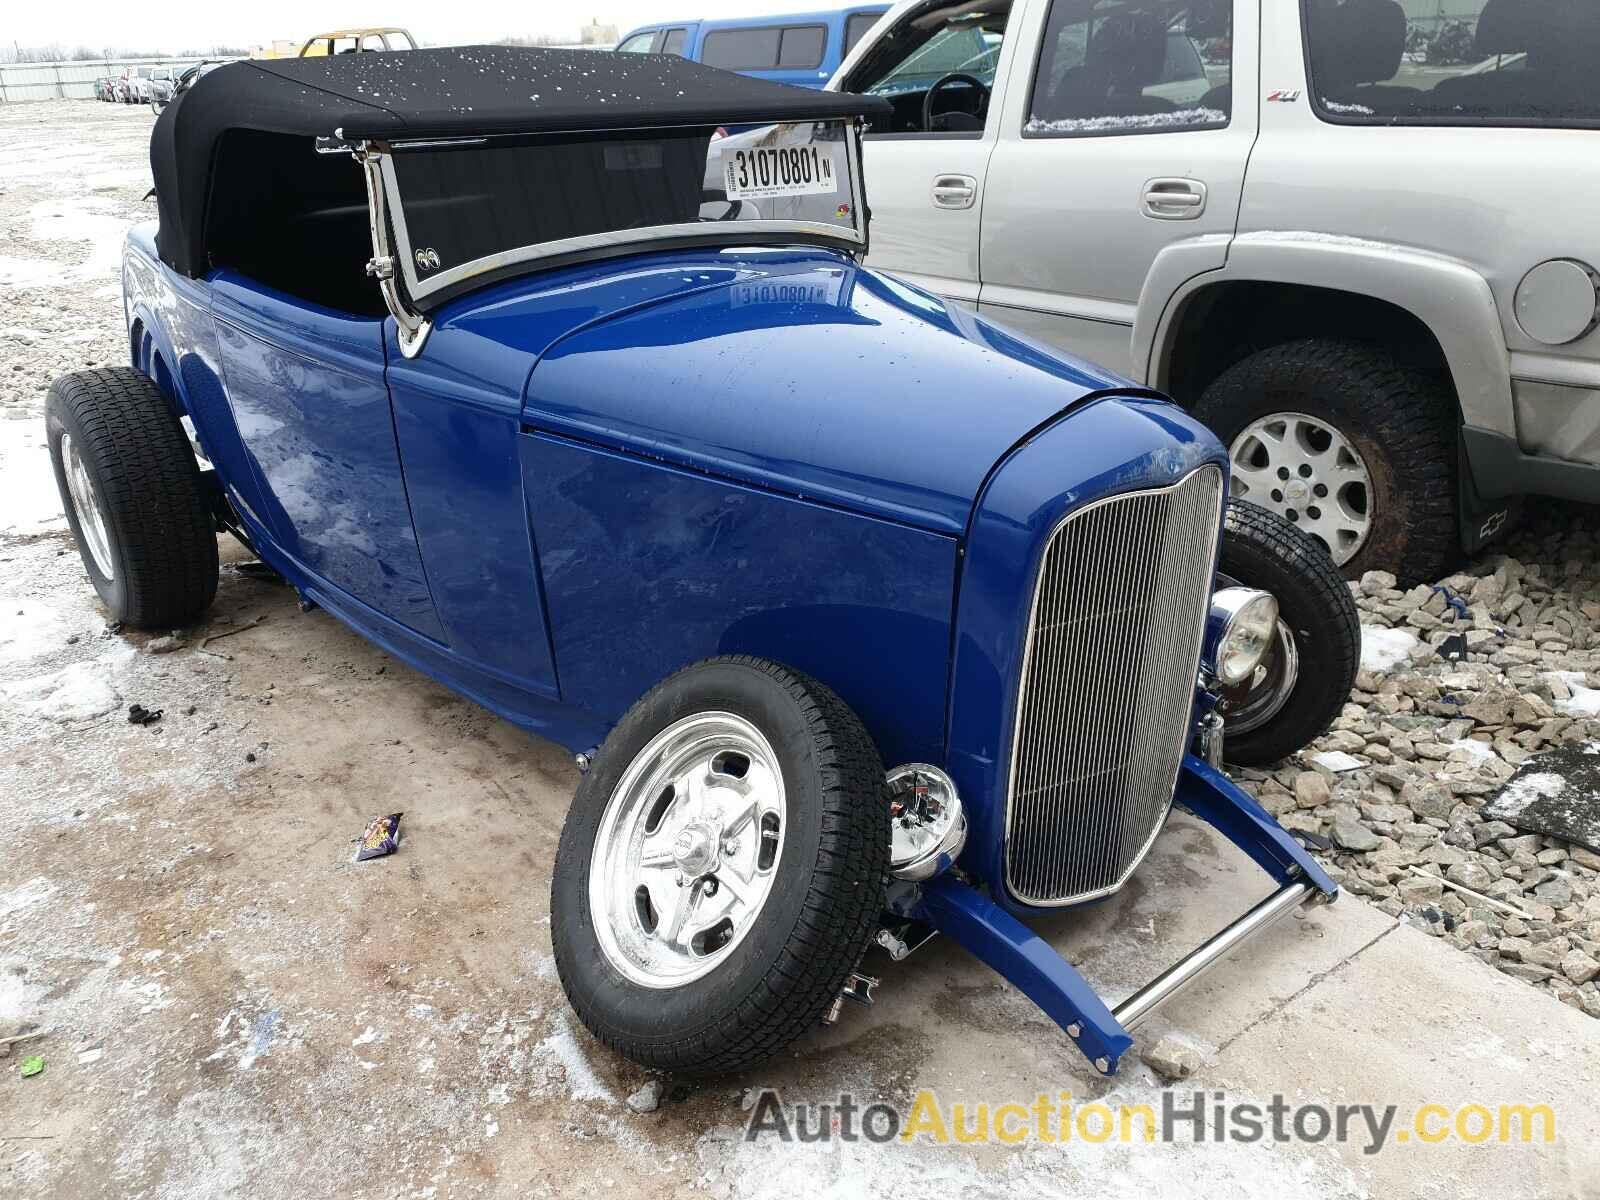 1932 FORD ROADSTER, R650307062012